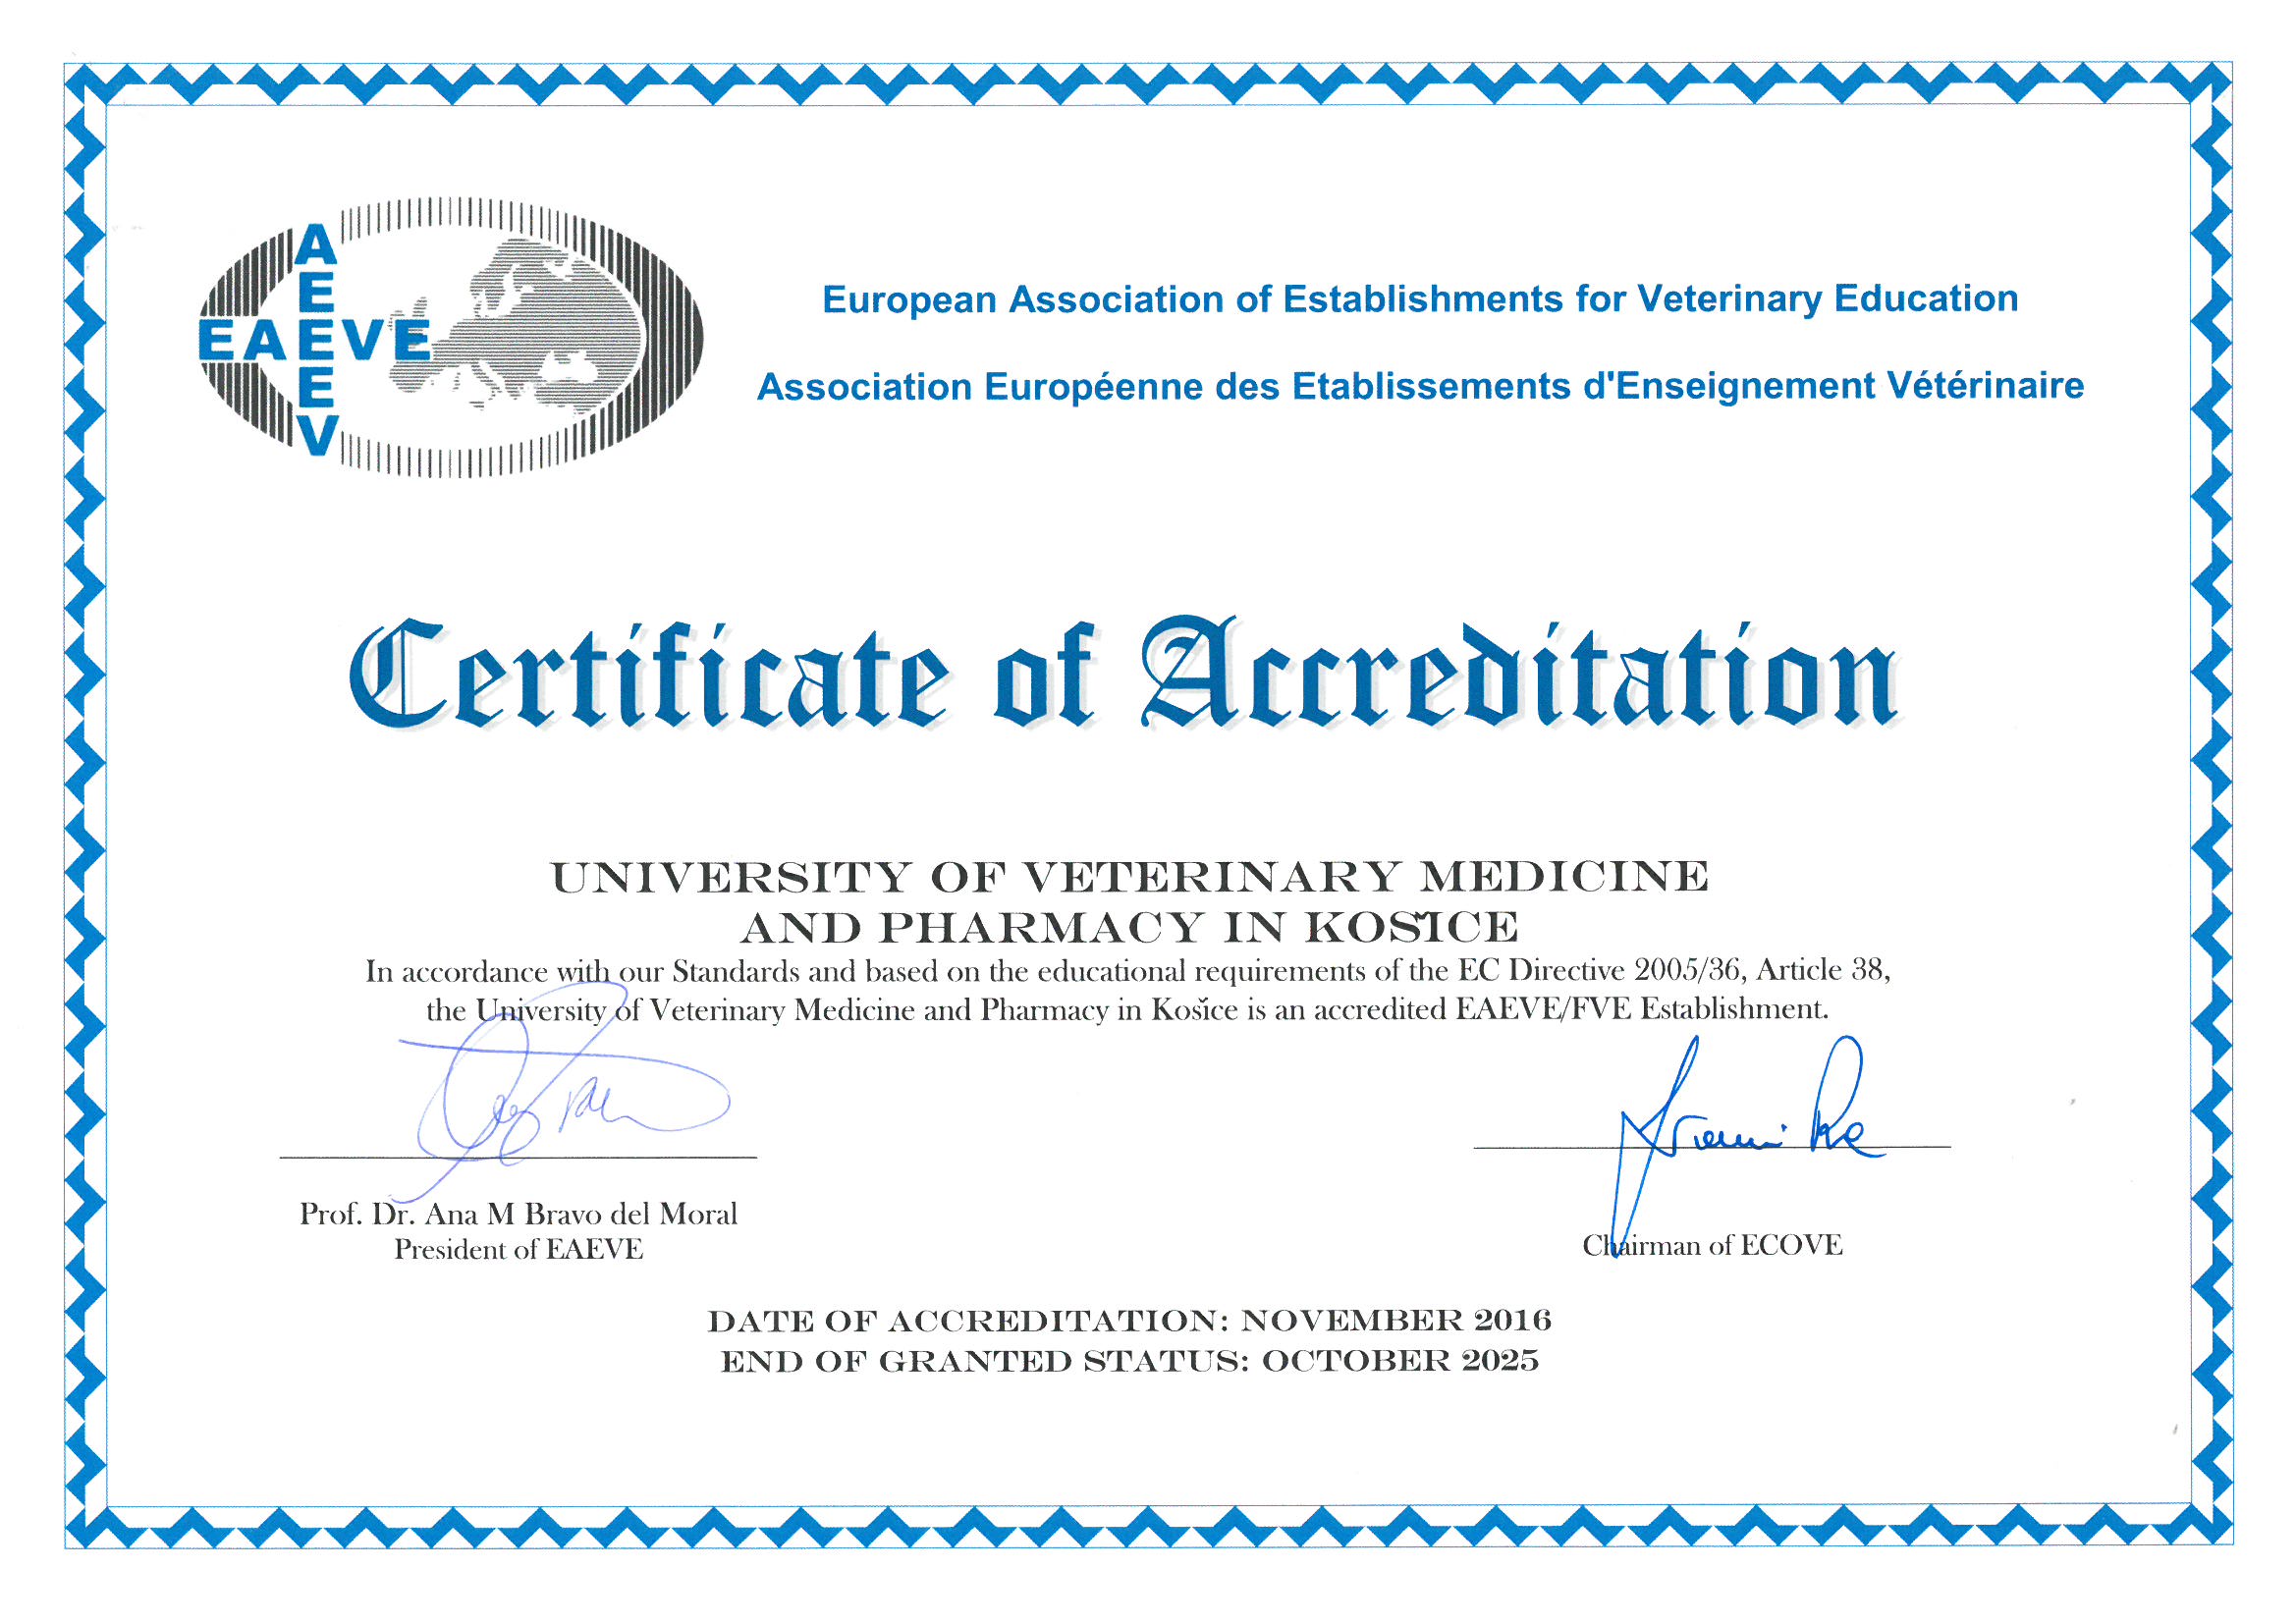 APPROVAL and ACCREDITATION by EAEVE